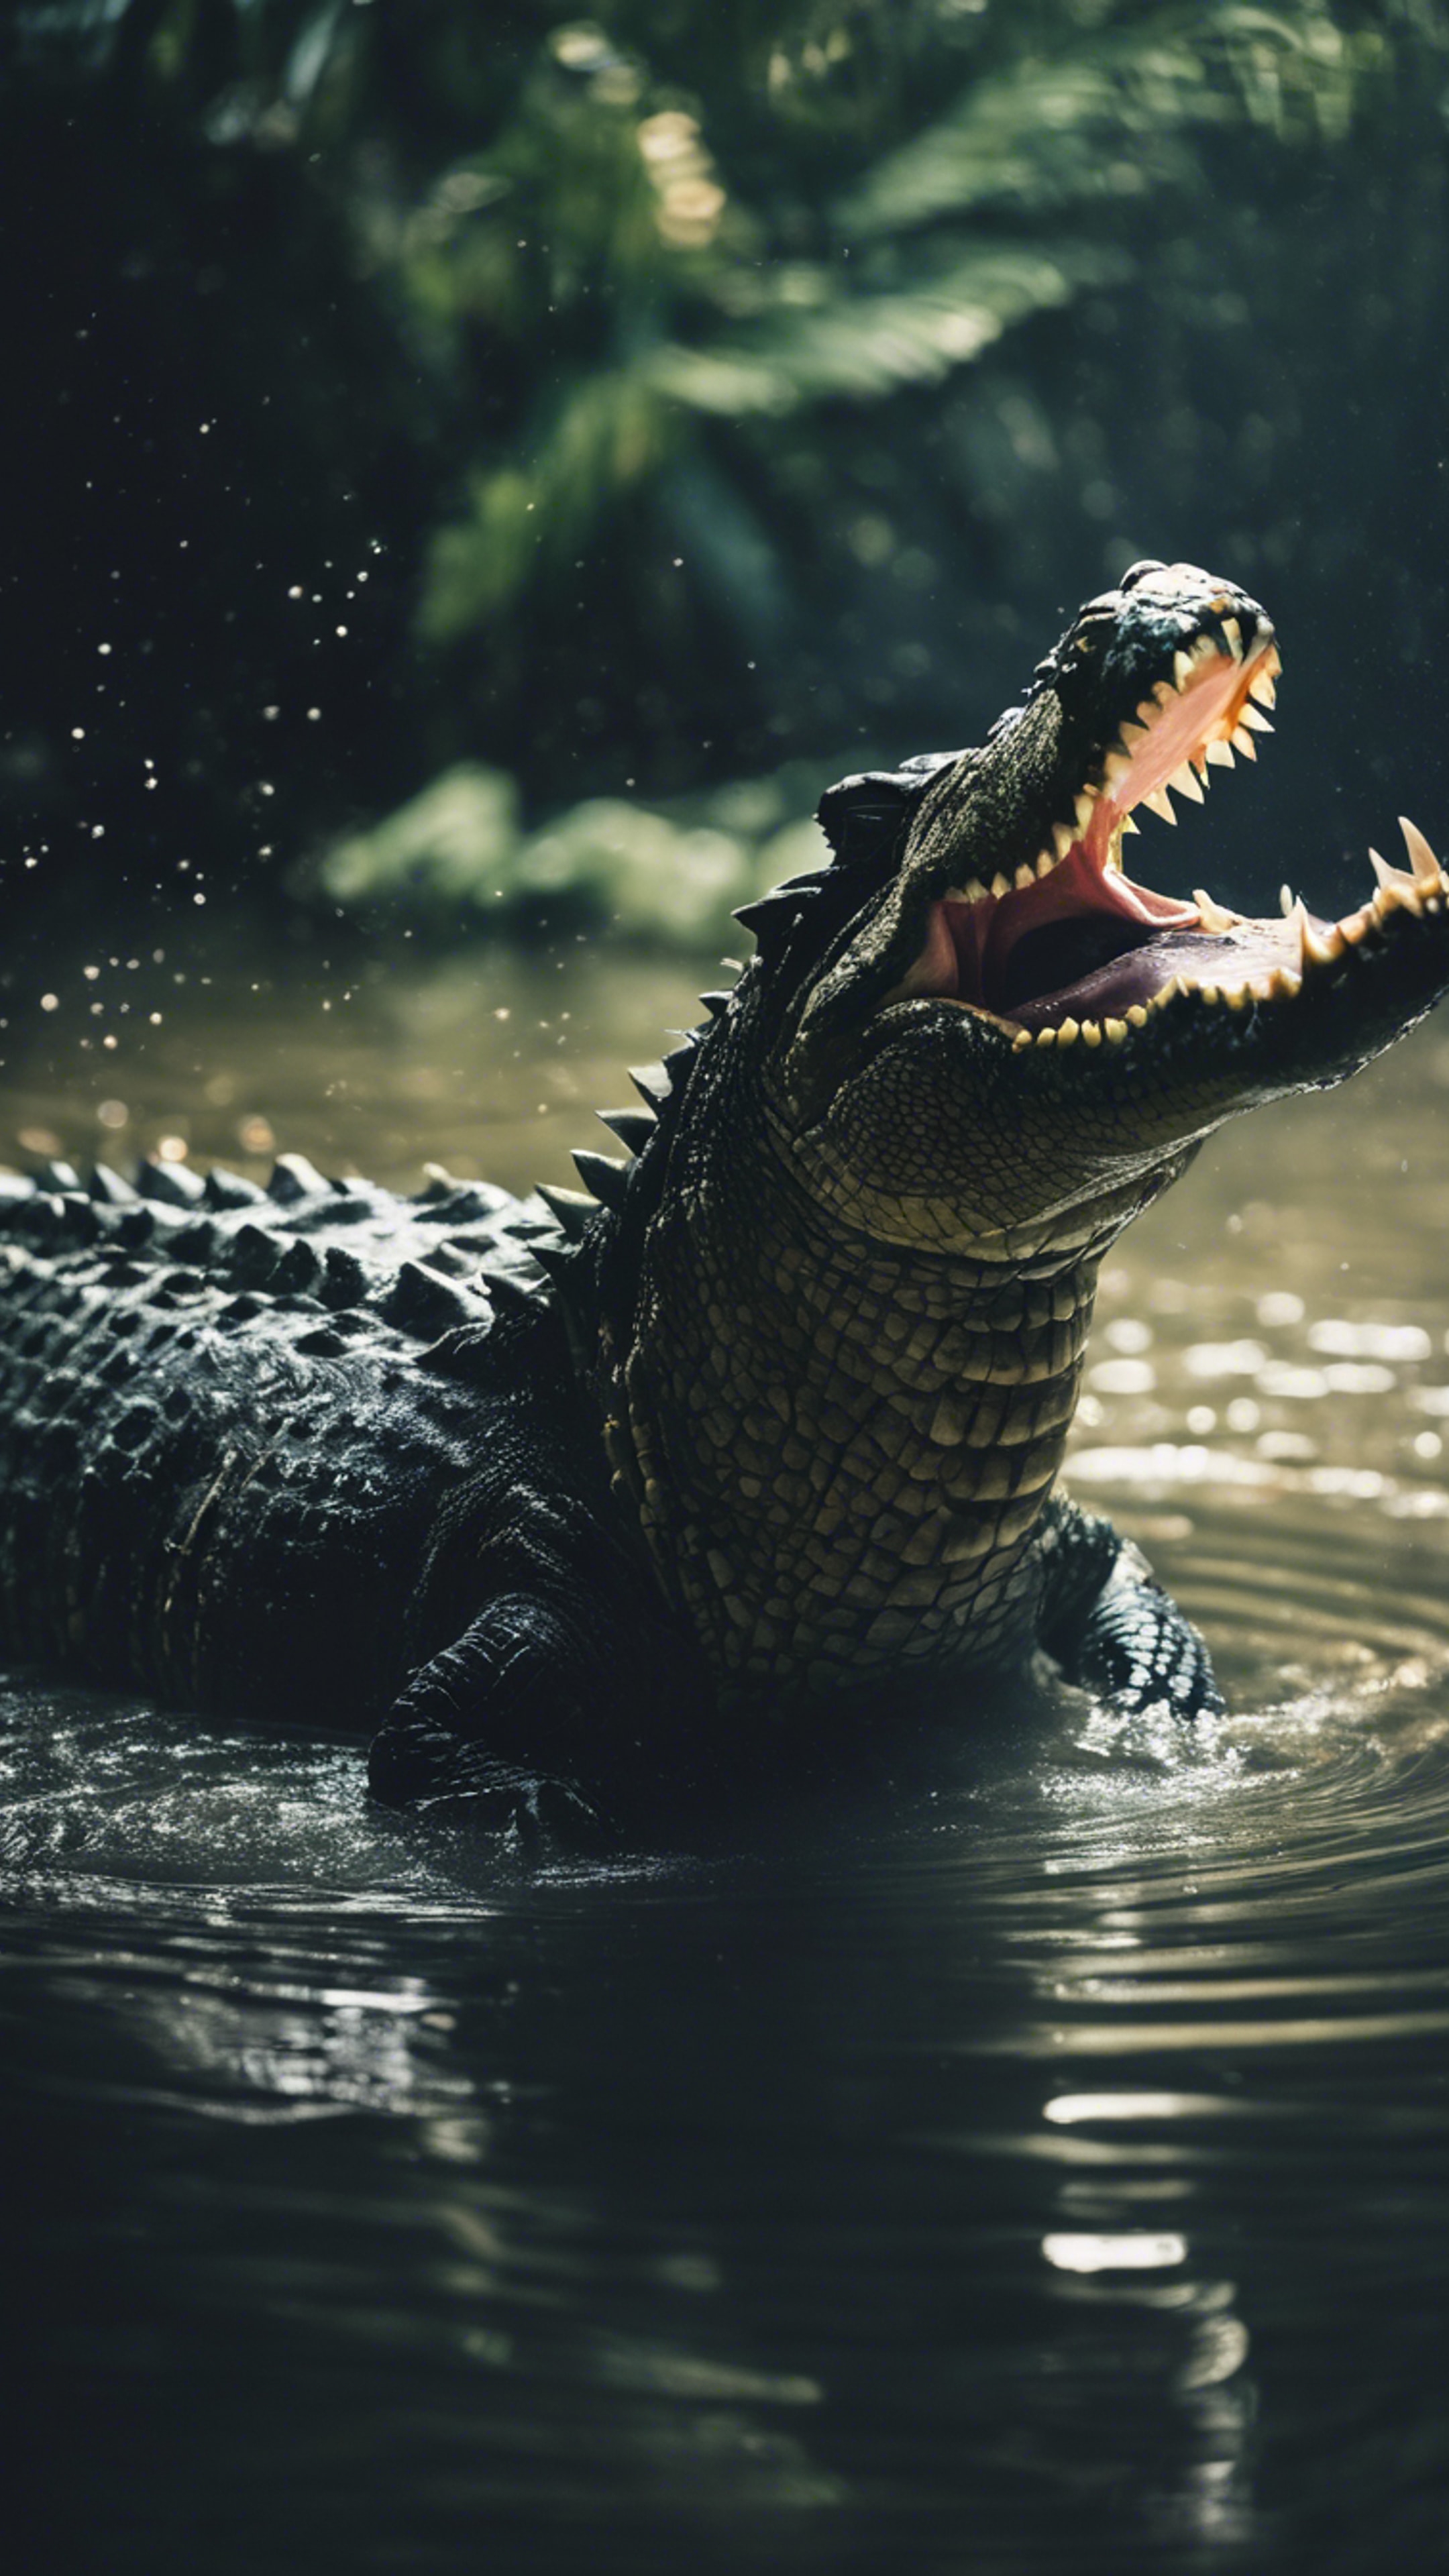 Two crocodiles engaging in a territorial battle in the middle of a dark lagoon. Behang[ccc66b55c2b3408d8928]